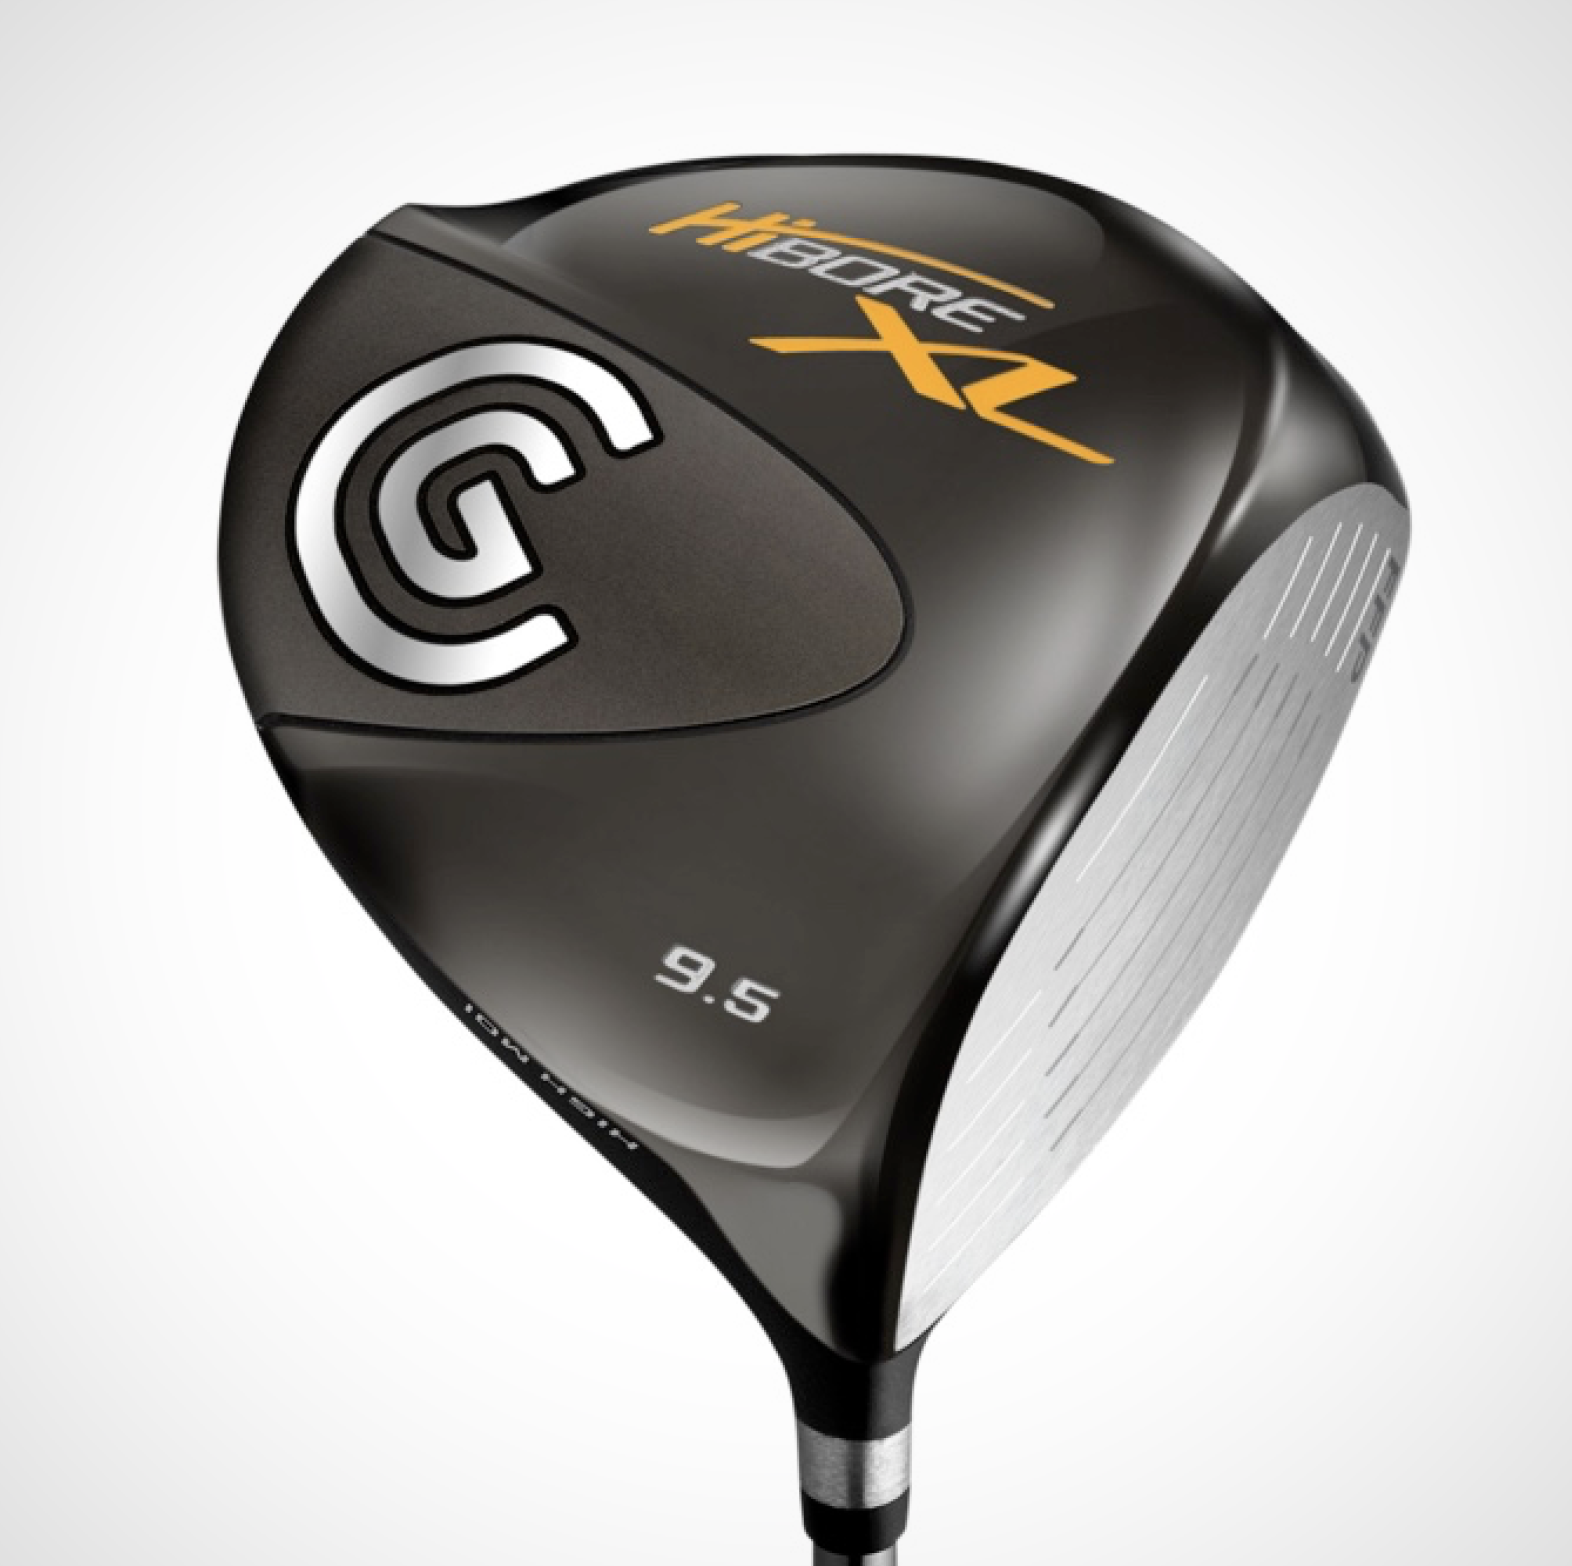 III. Choosing the Right Golf Club for Your Game